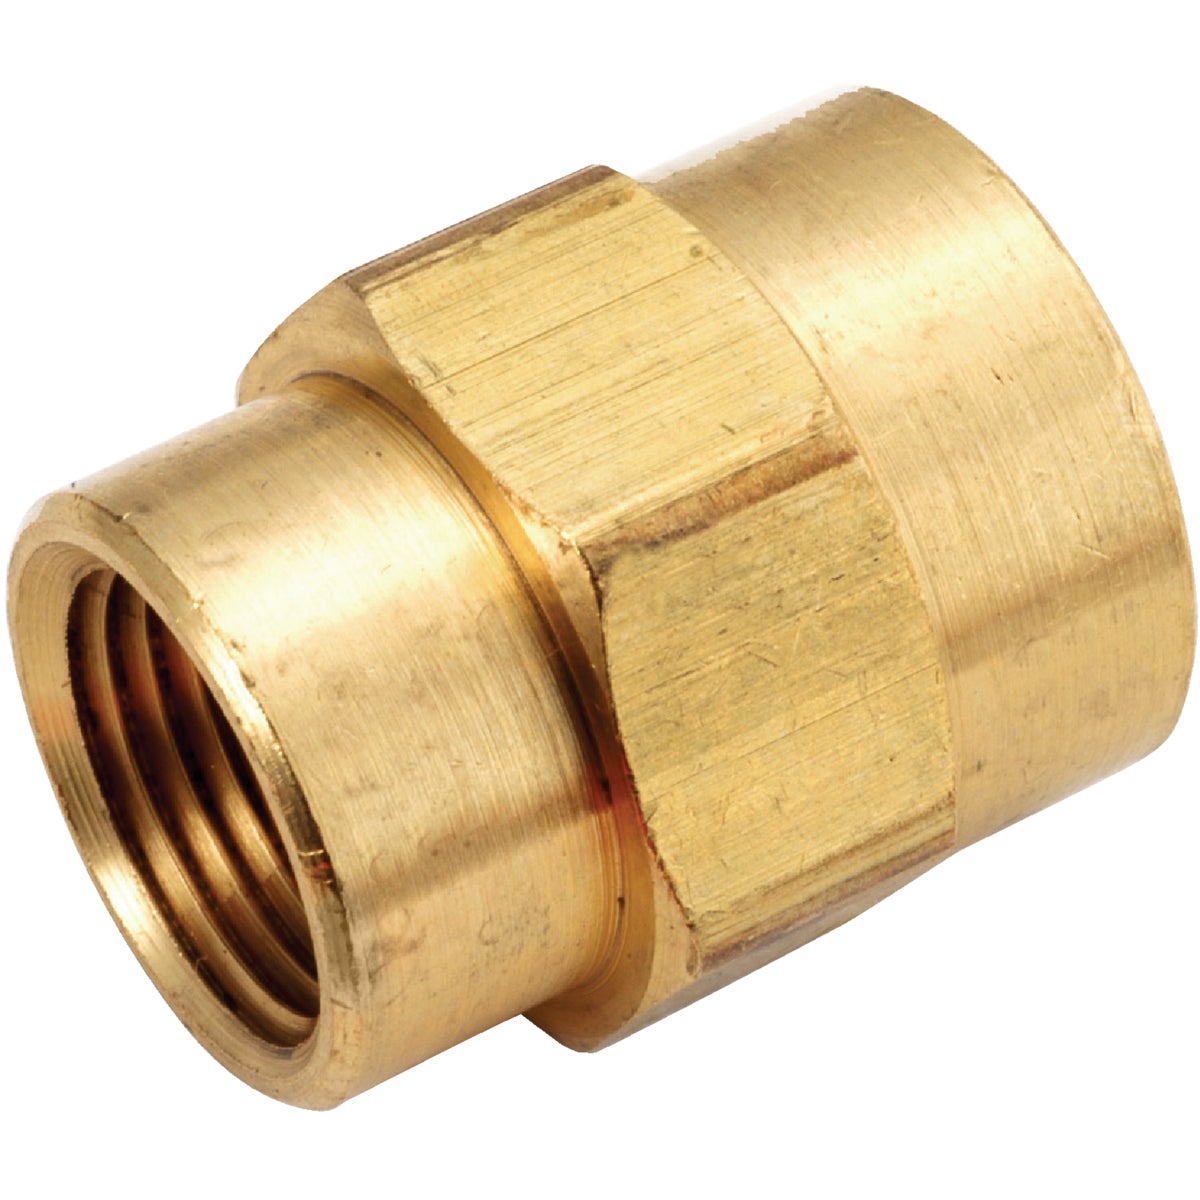 Anderson Metals 1/2 In. x 3/8 In. Yellow Brass Reducing Coupling